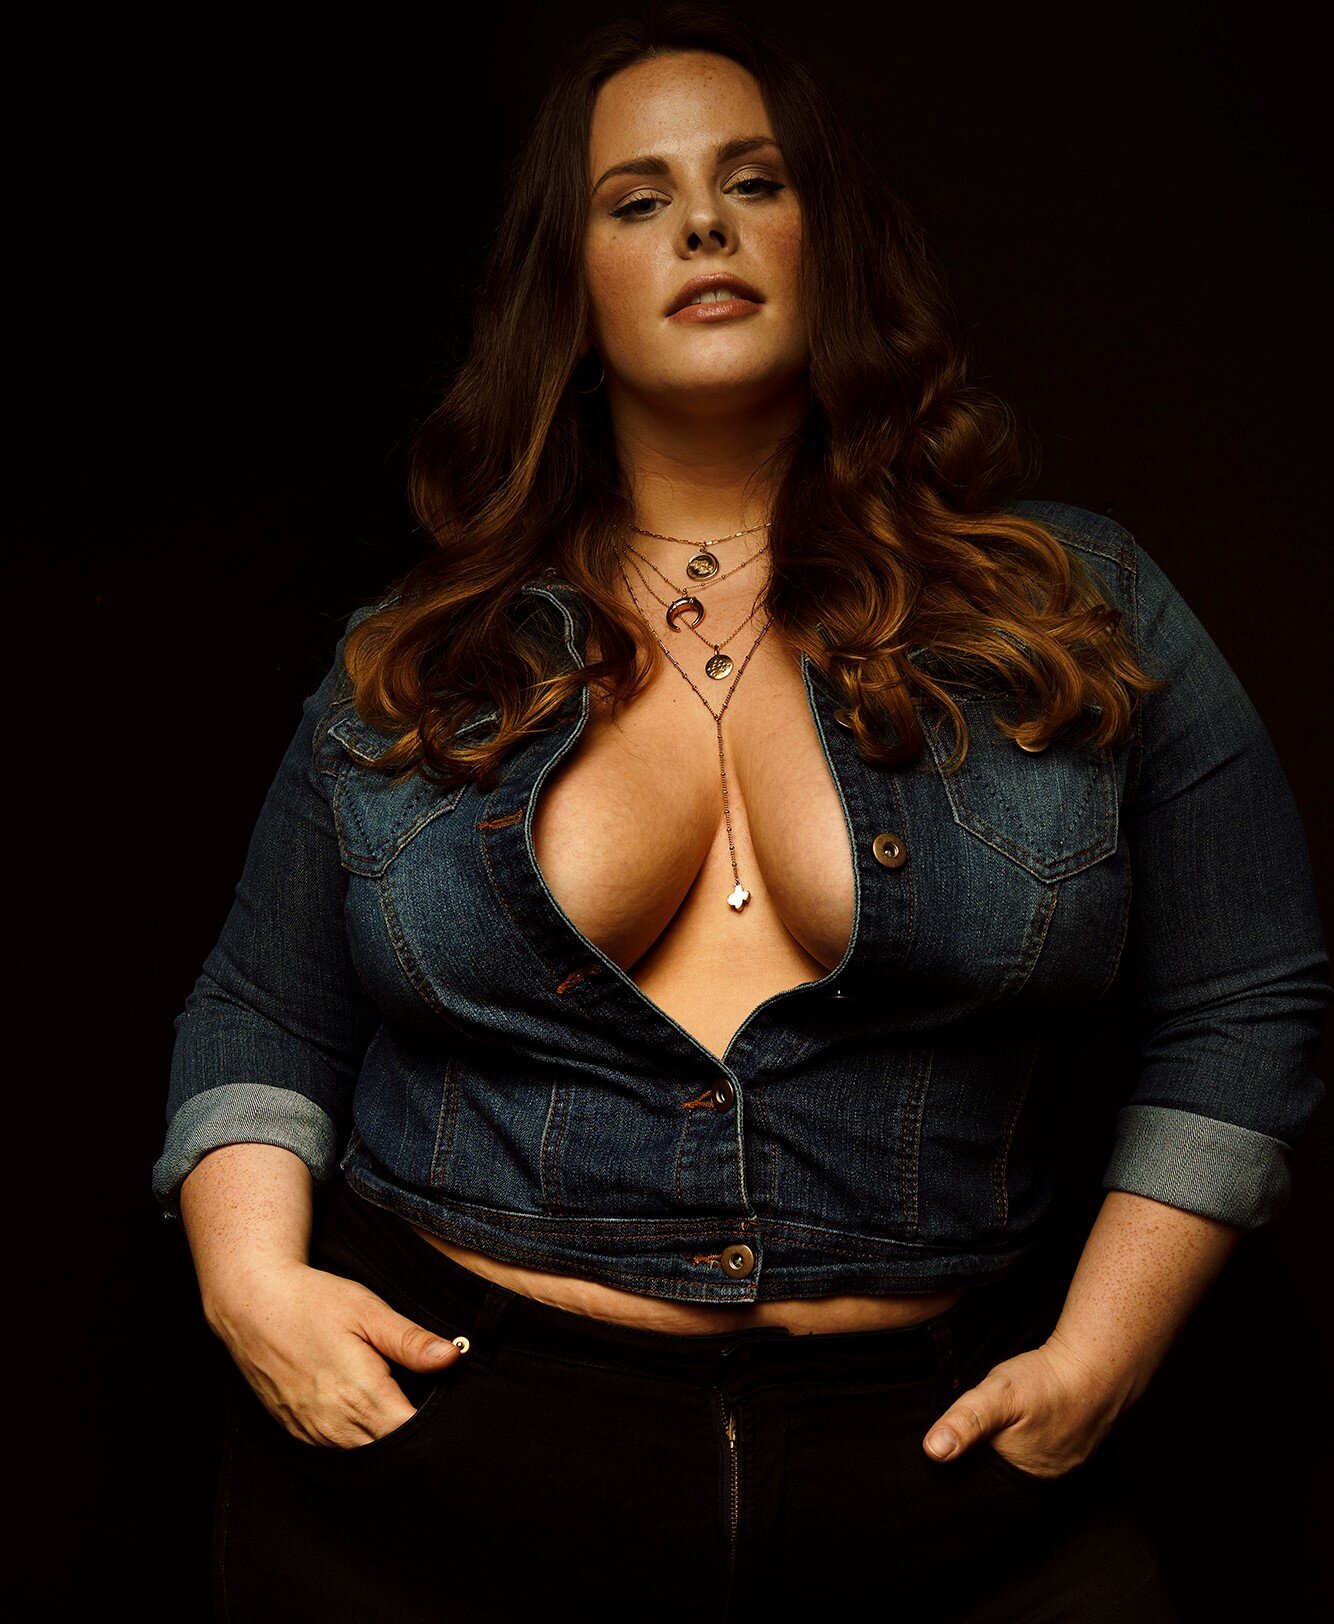 Plus Size Model Morgan Louise Plus (40G) Shows Off All The Styles